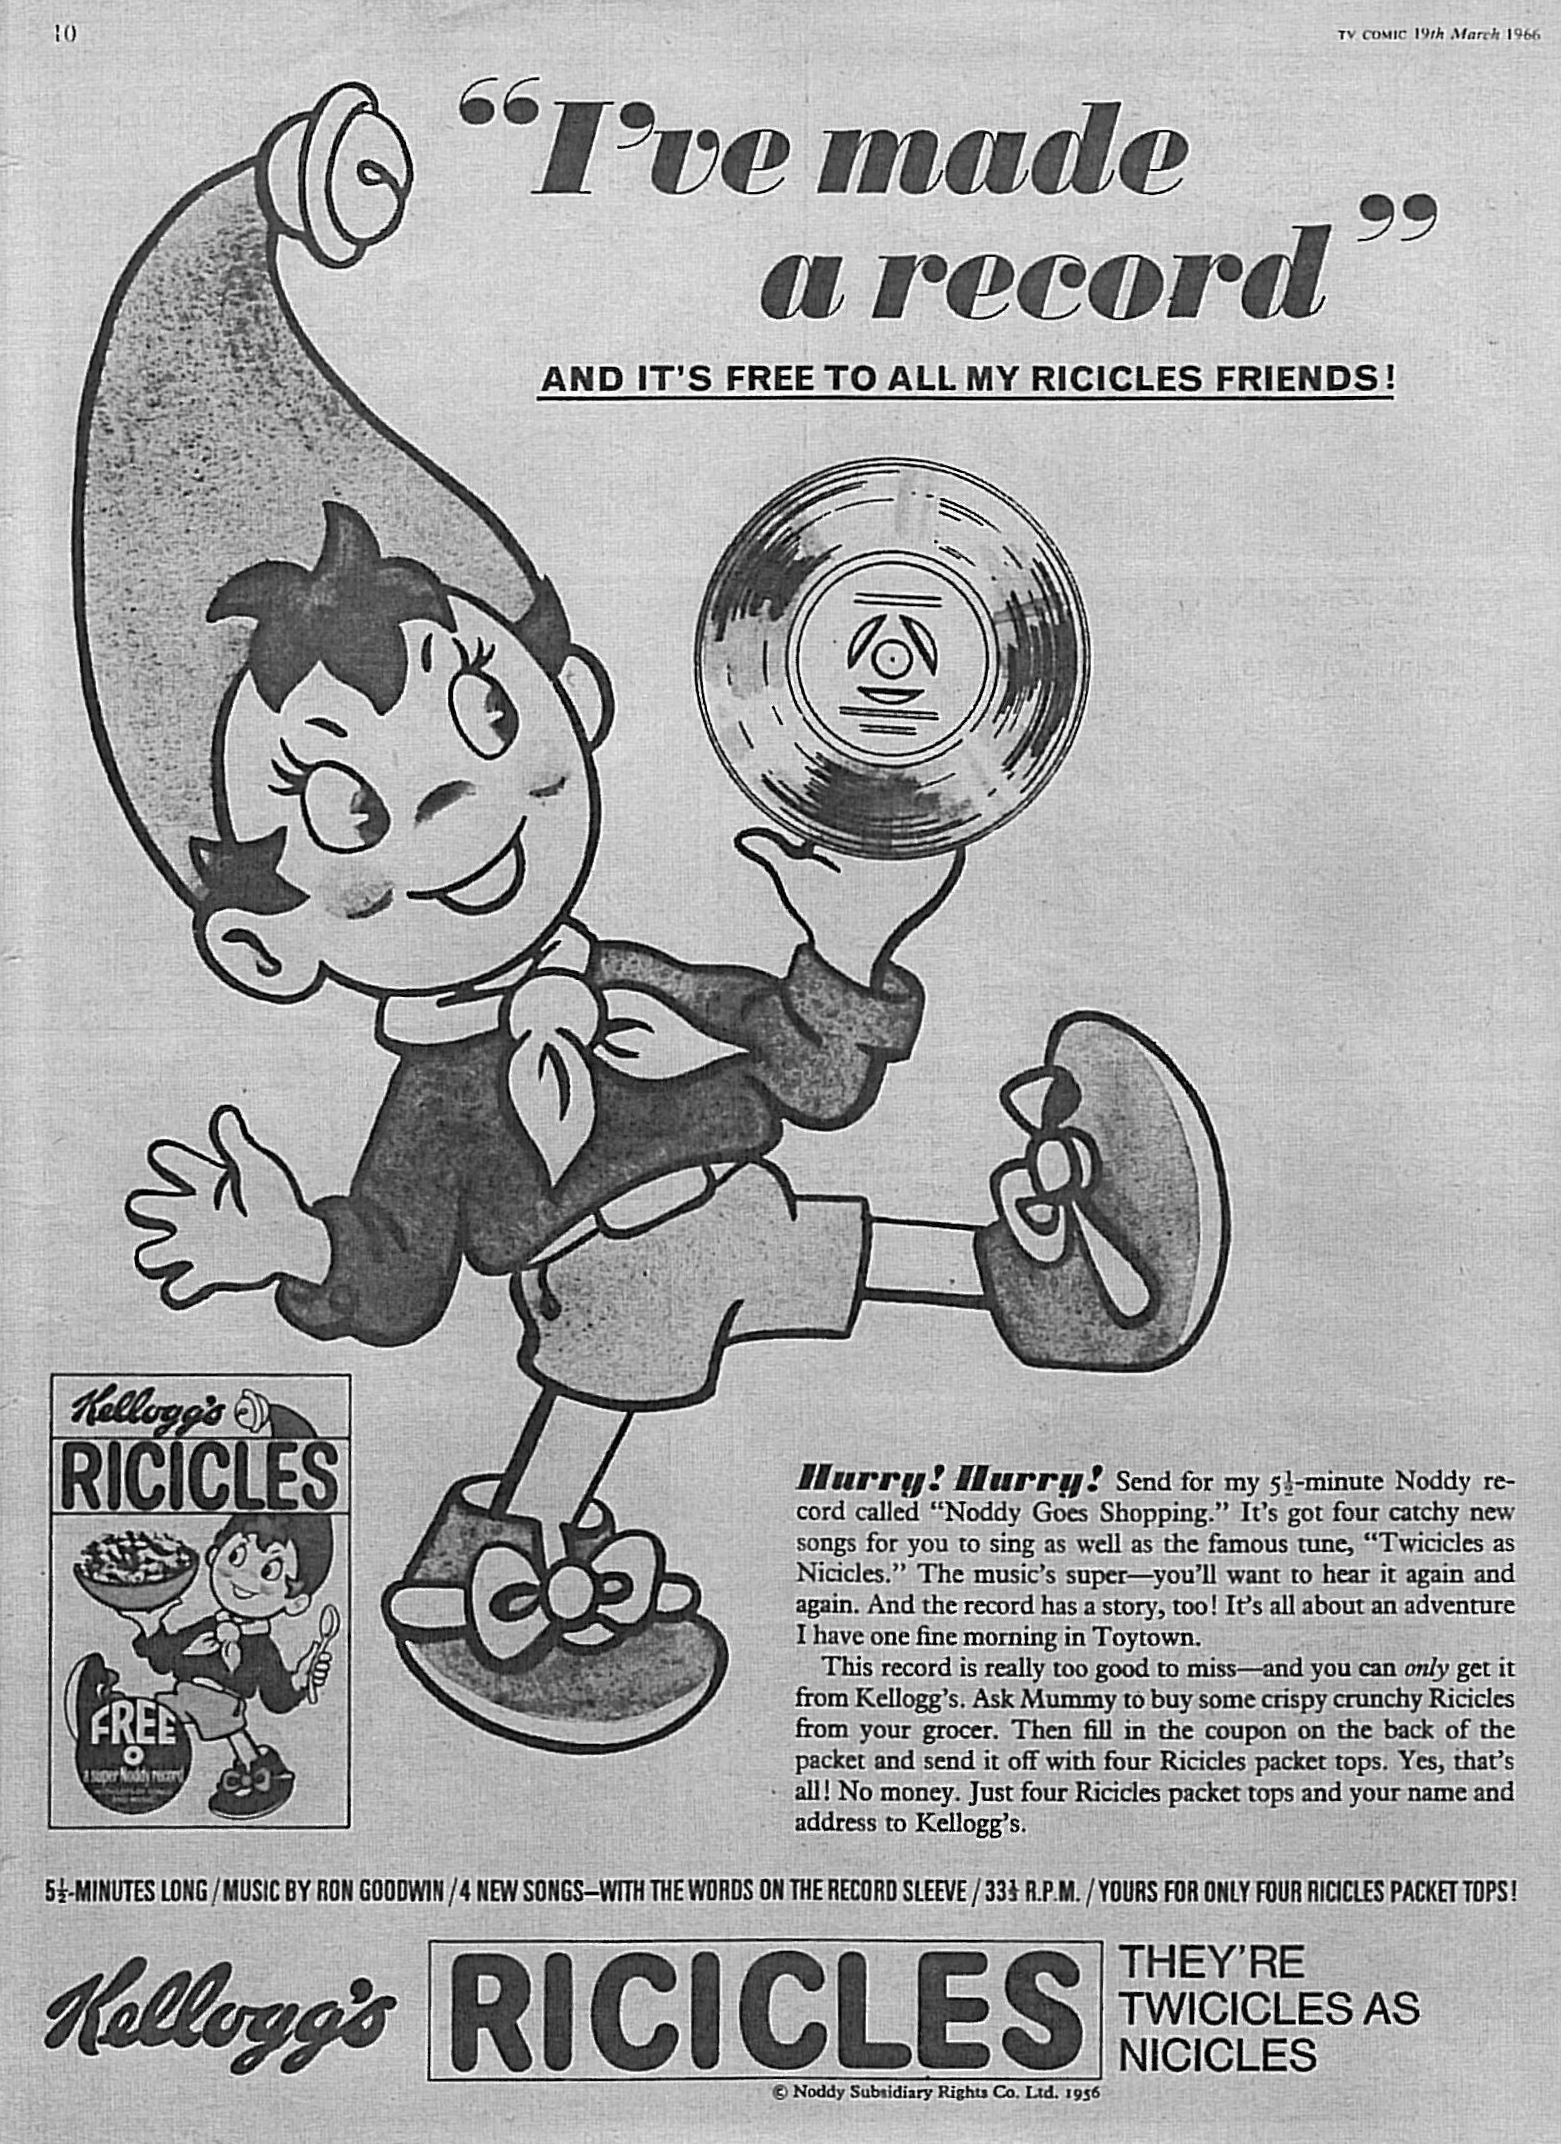 1966 Ricicles Noddy Record